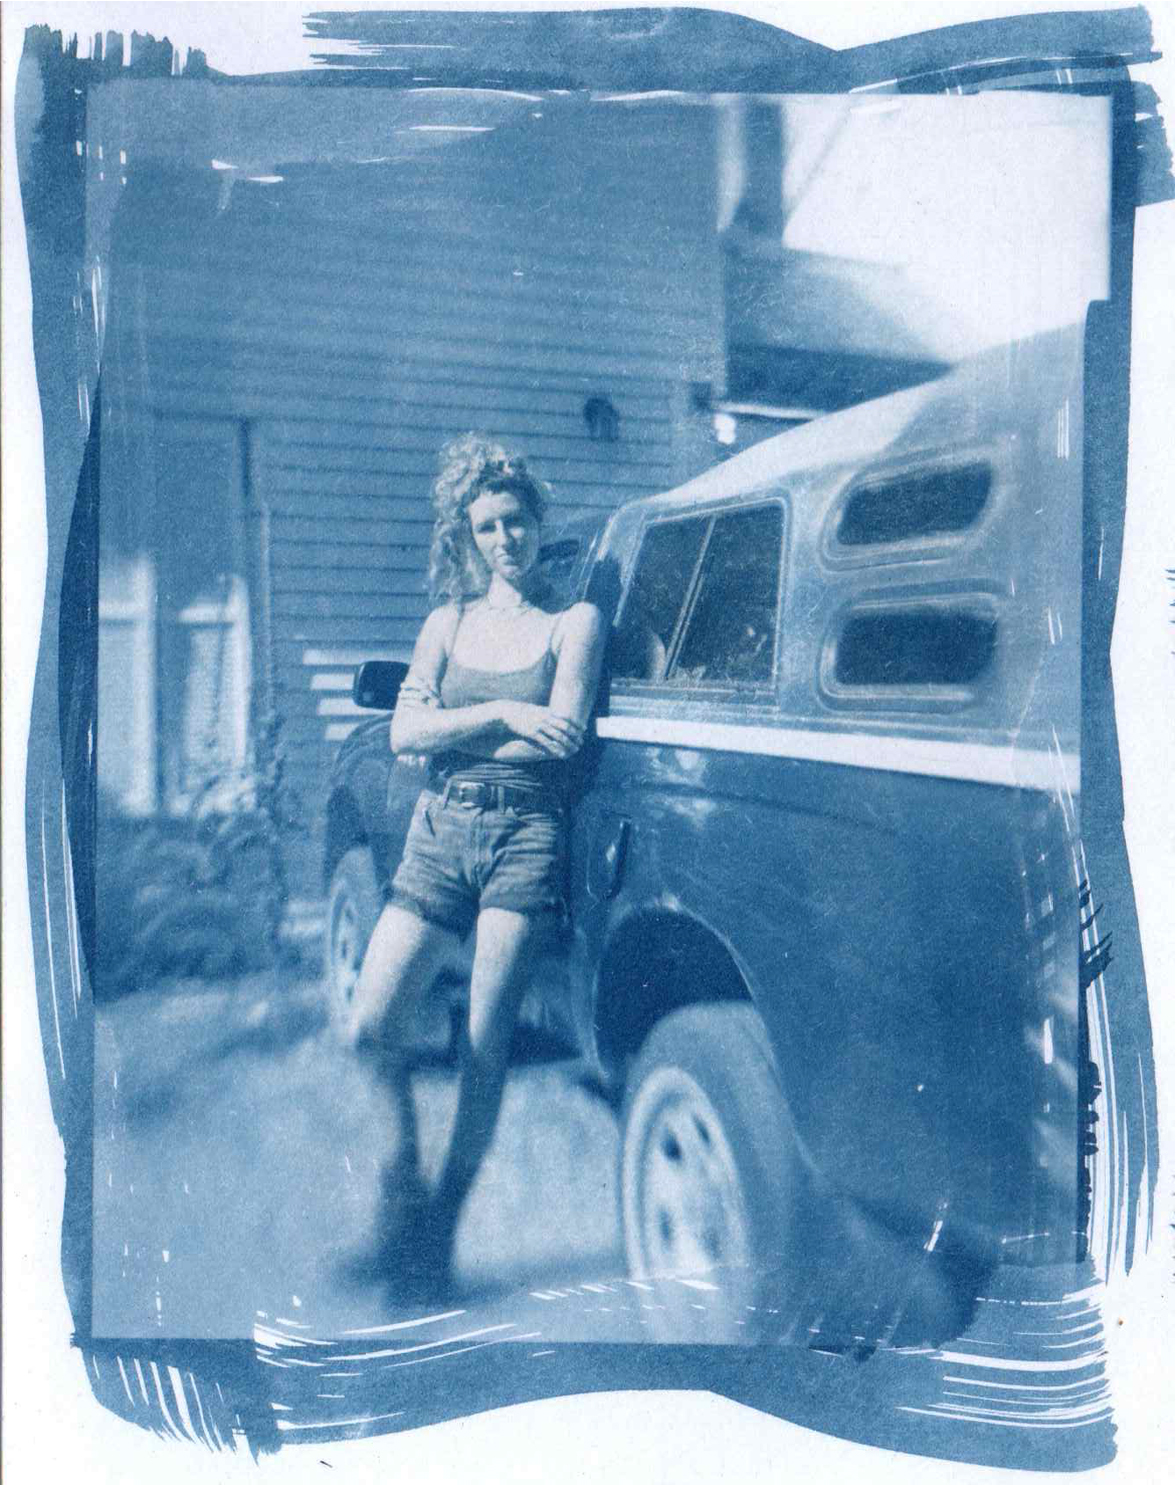 Audj | 4x5”, Cyanotype (from film negative shot in cardboard 4x5 camera with magnifying glass lens), 2022